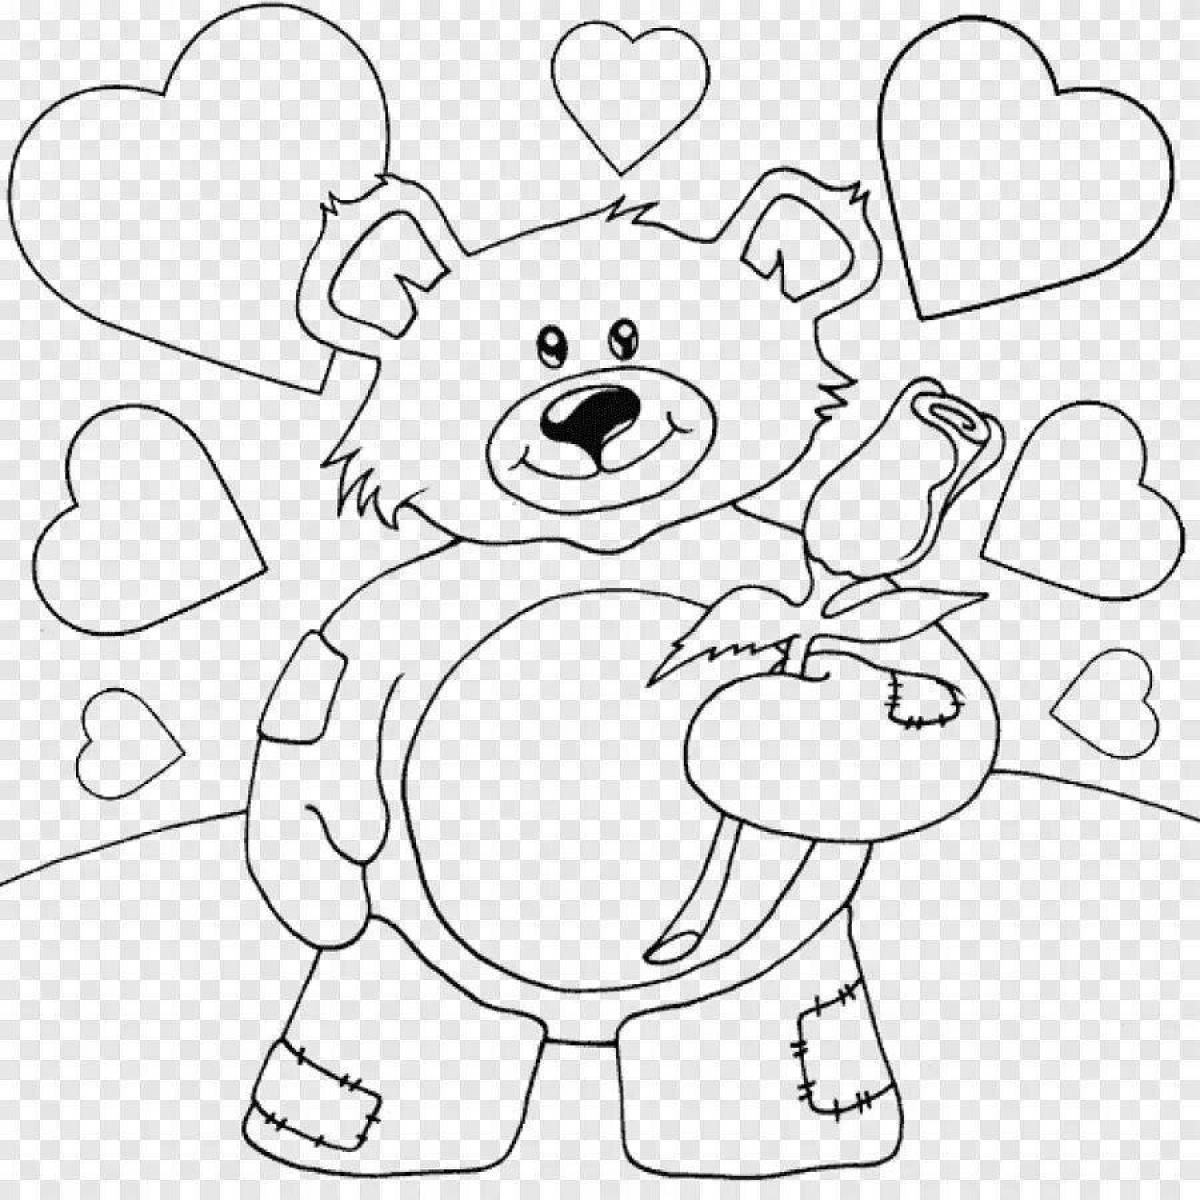 Coloring page gentle teddy bear with a heart